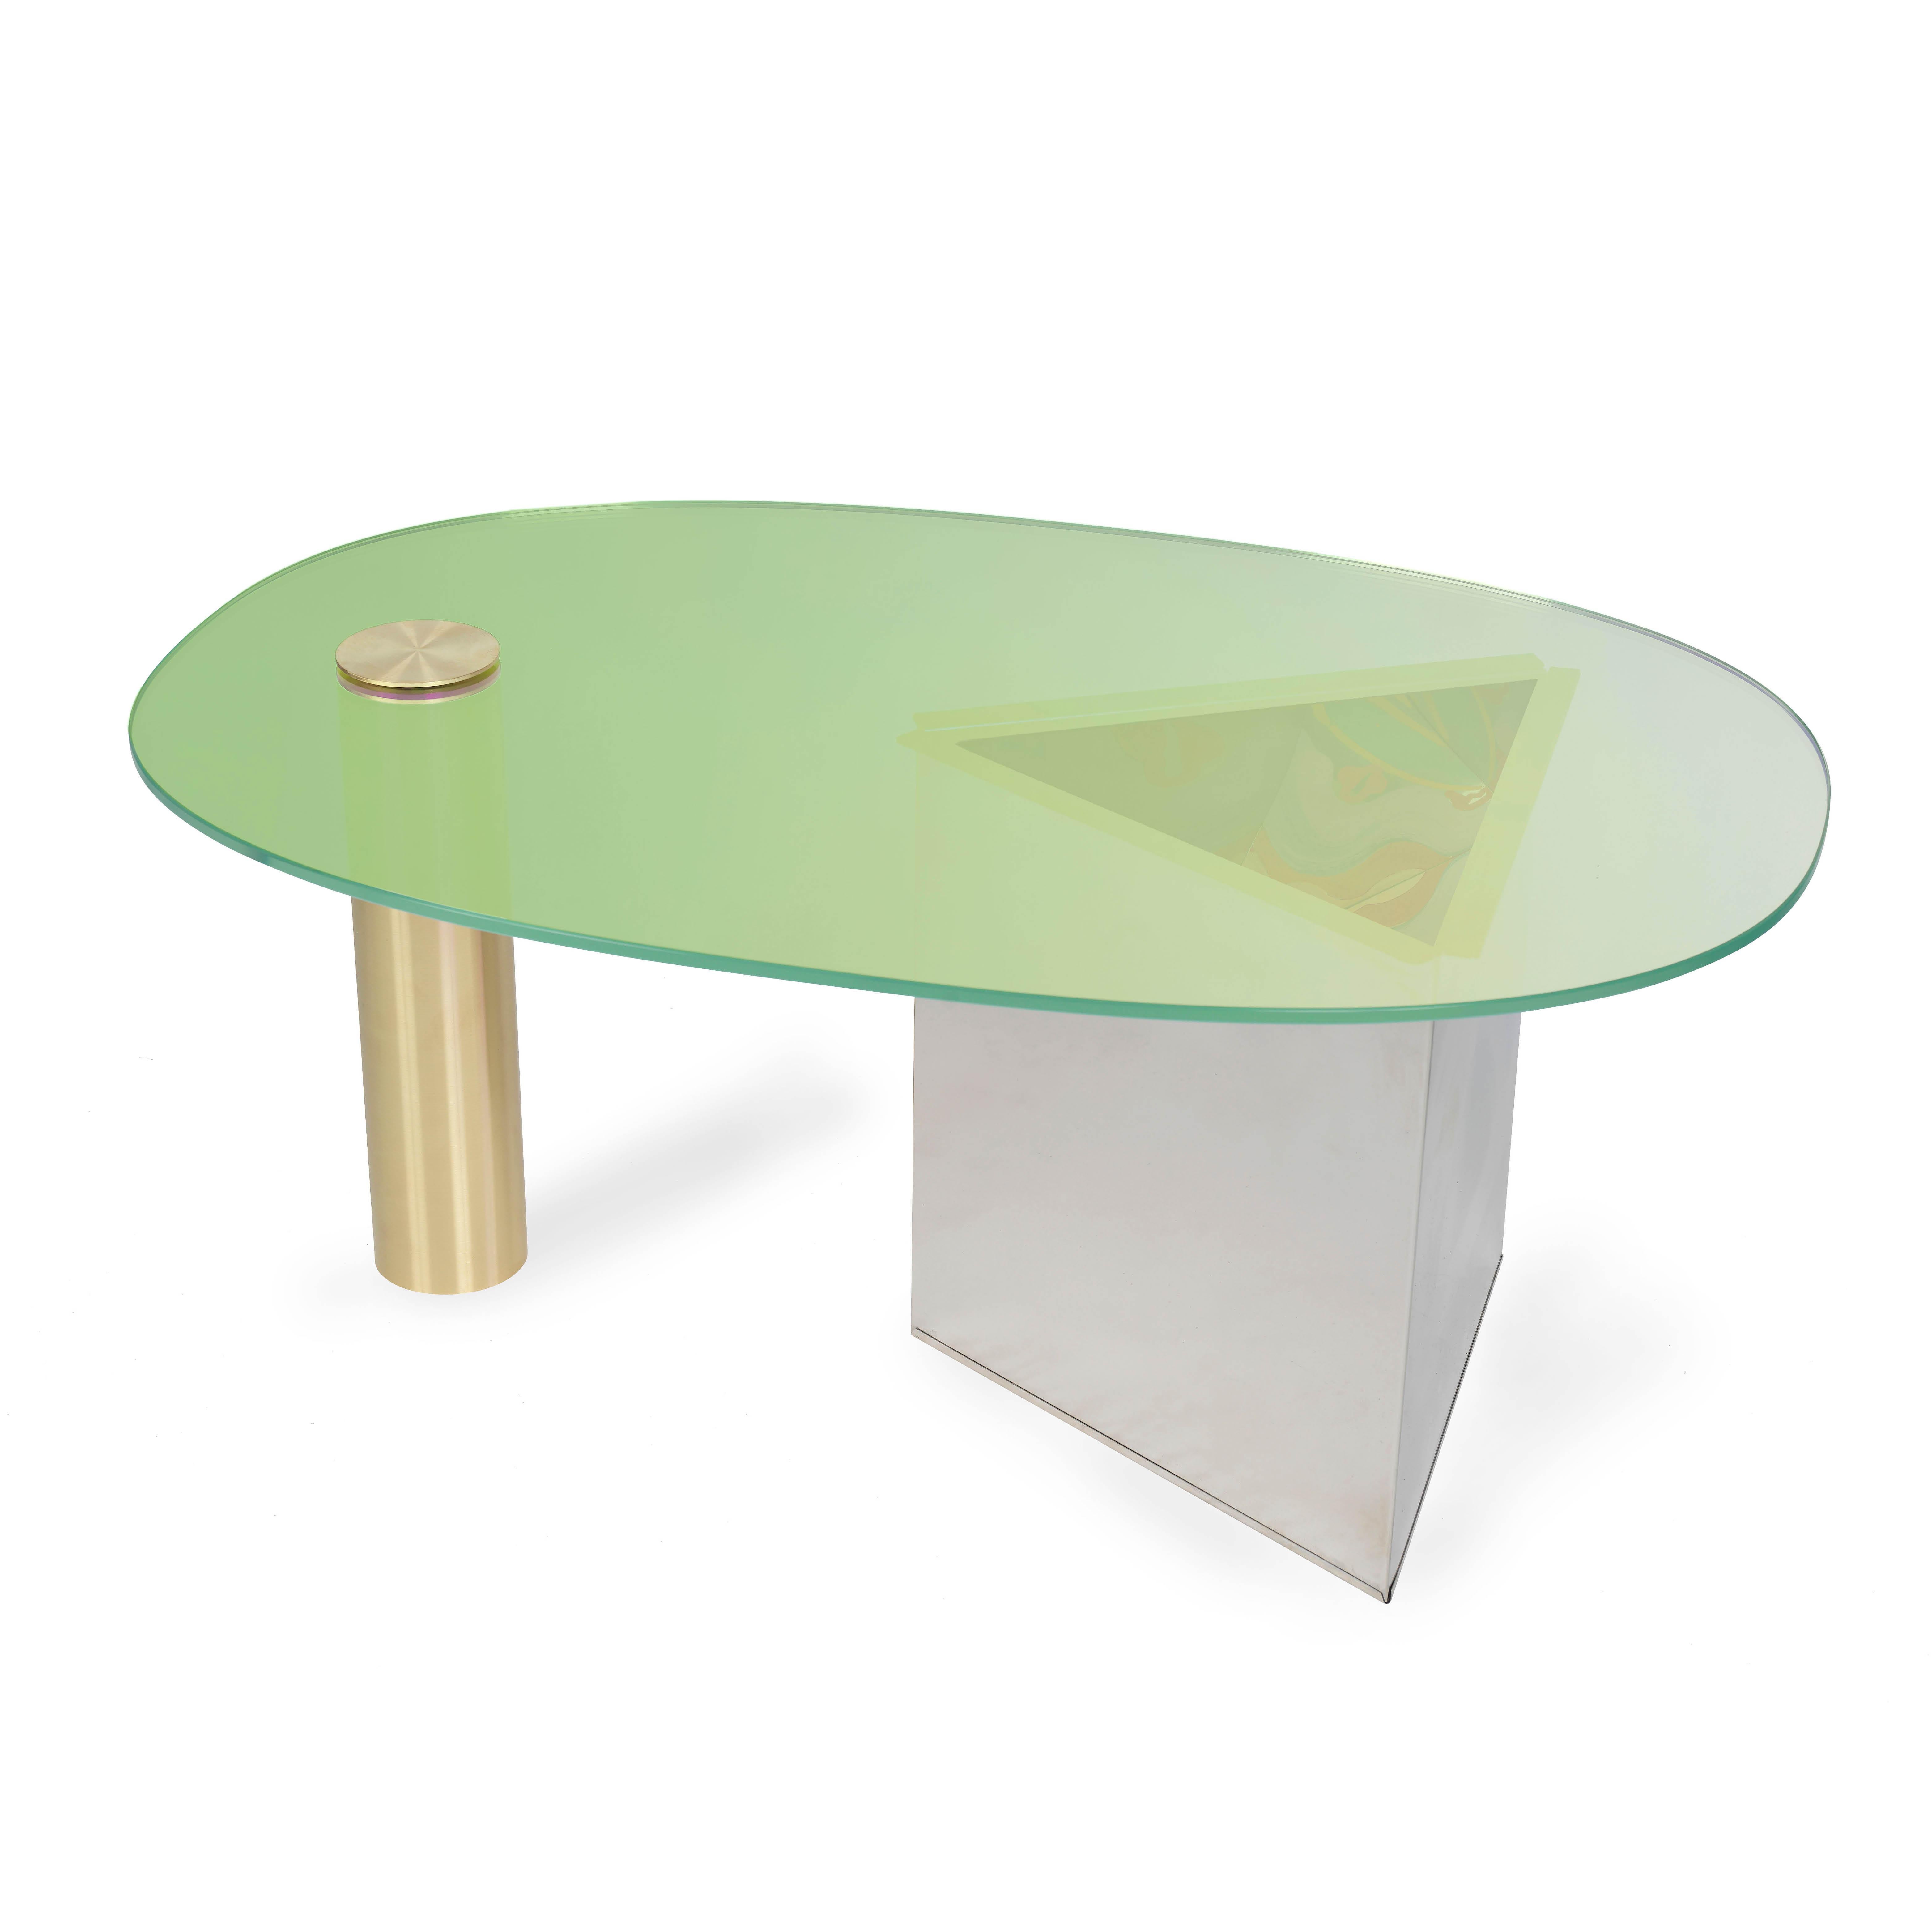 Ettore green coffee table by Åsa Jungnelius
Dimensions: 43 x 67 x 100 cm
Materials: Dichroic glass, brass, stainless steel. 

Each table is individually painted by the artist. Limited edition

Åsa Jungnelius is a visual artist (MFA) and a